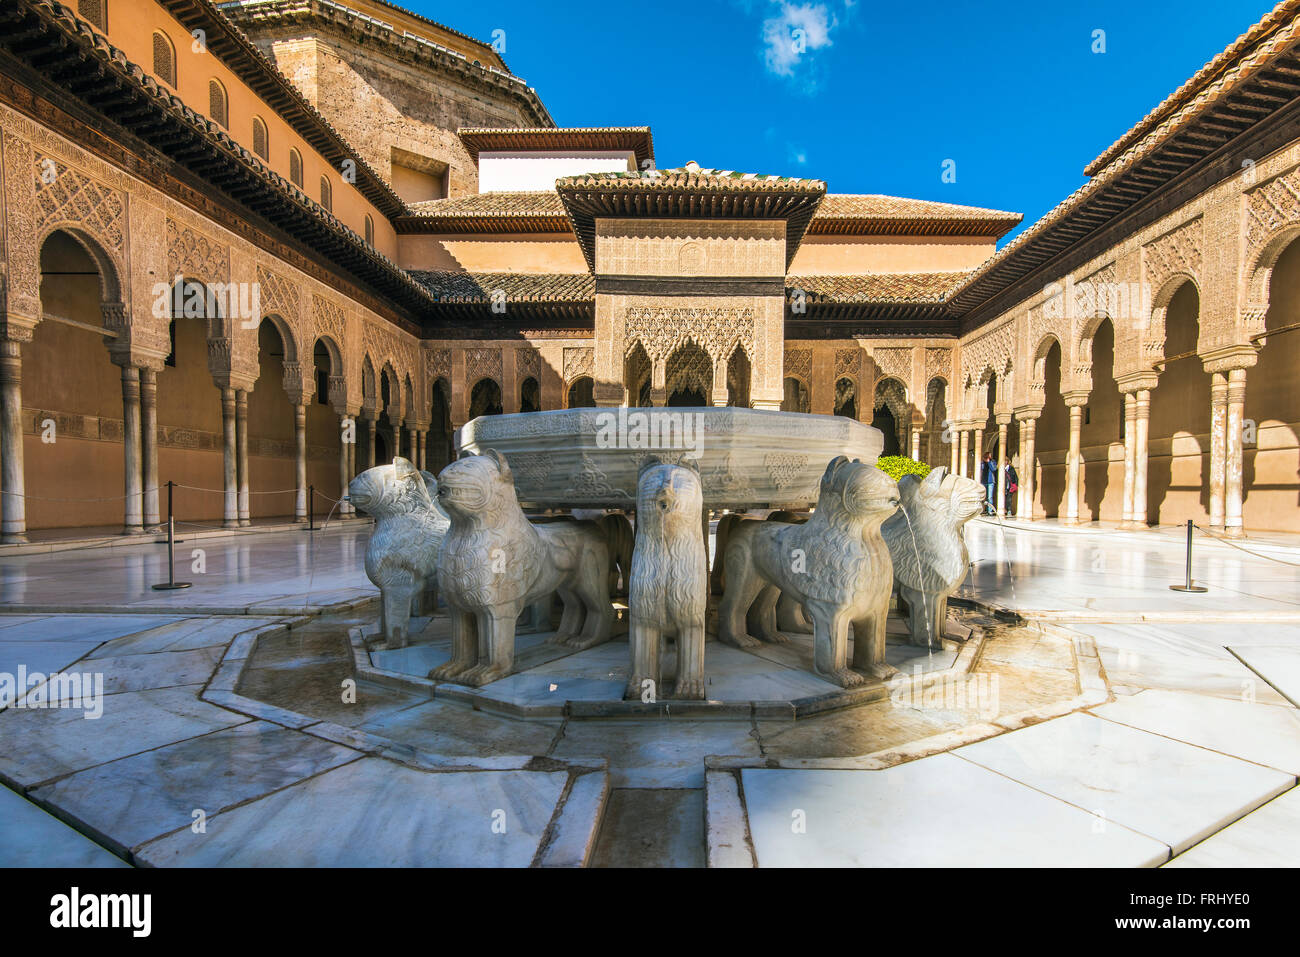 Fountain of the Court of the Lions, Palace of the Lions, Alhambra palace, Granada, Andalusia, Spain Stock Photo